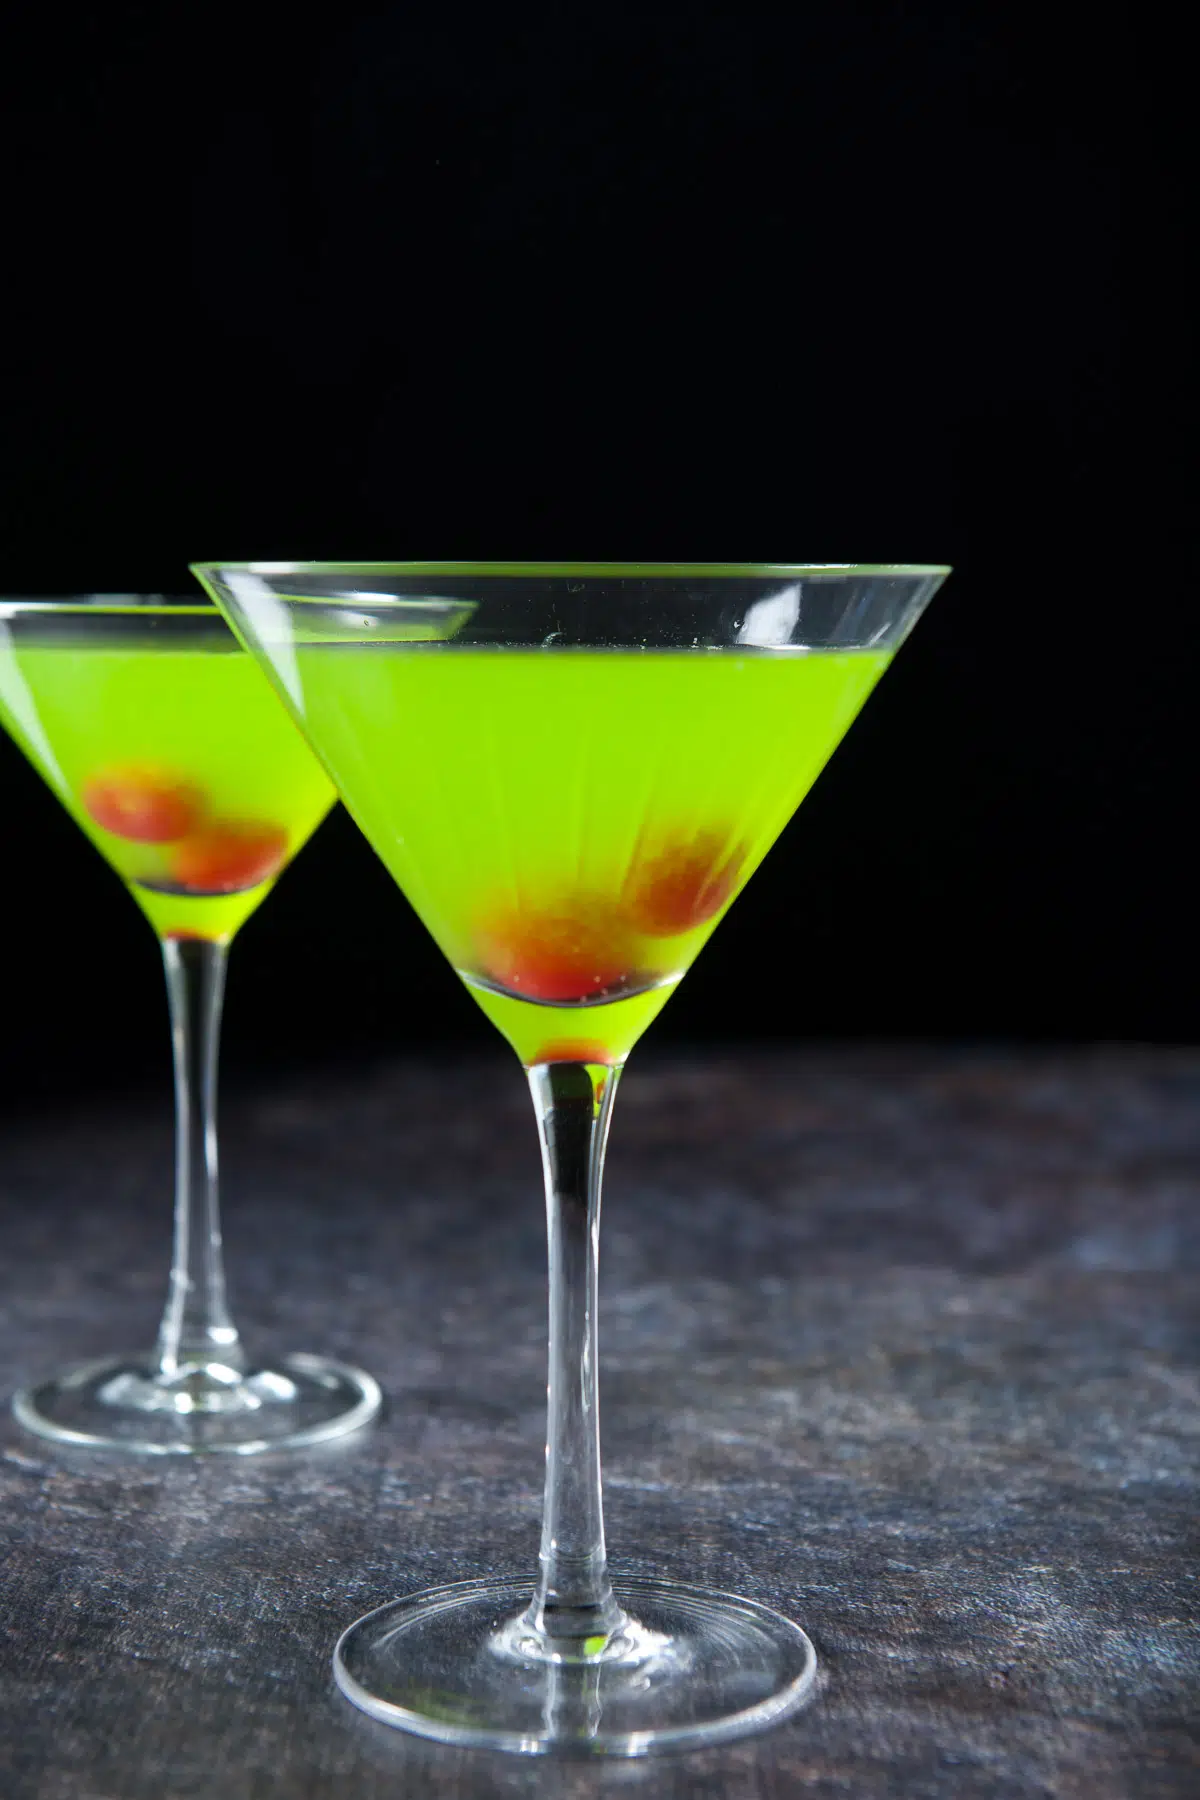 Vertical view of the bright green cocktail with two cherries in each glasses